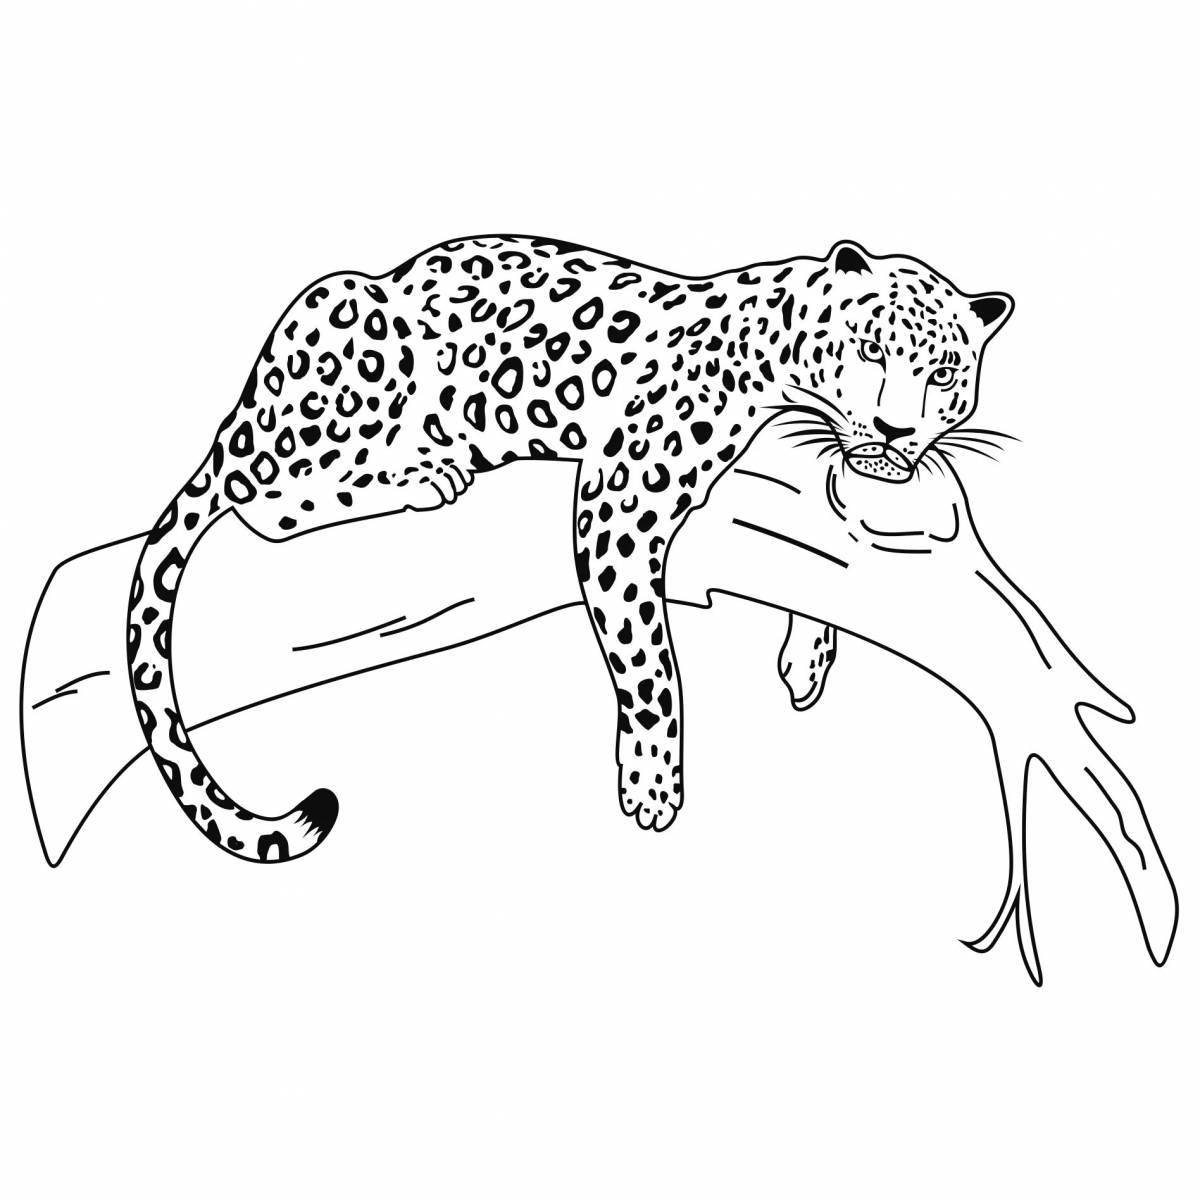 Coloring page dazzling snow leopard